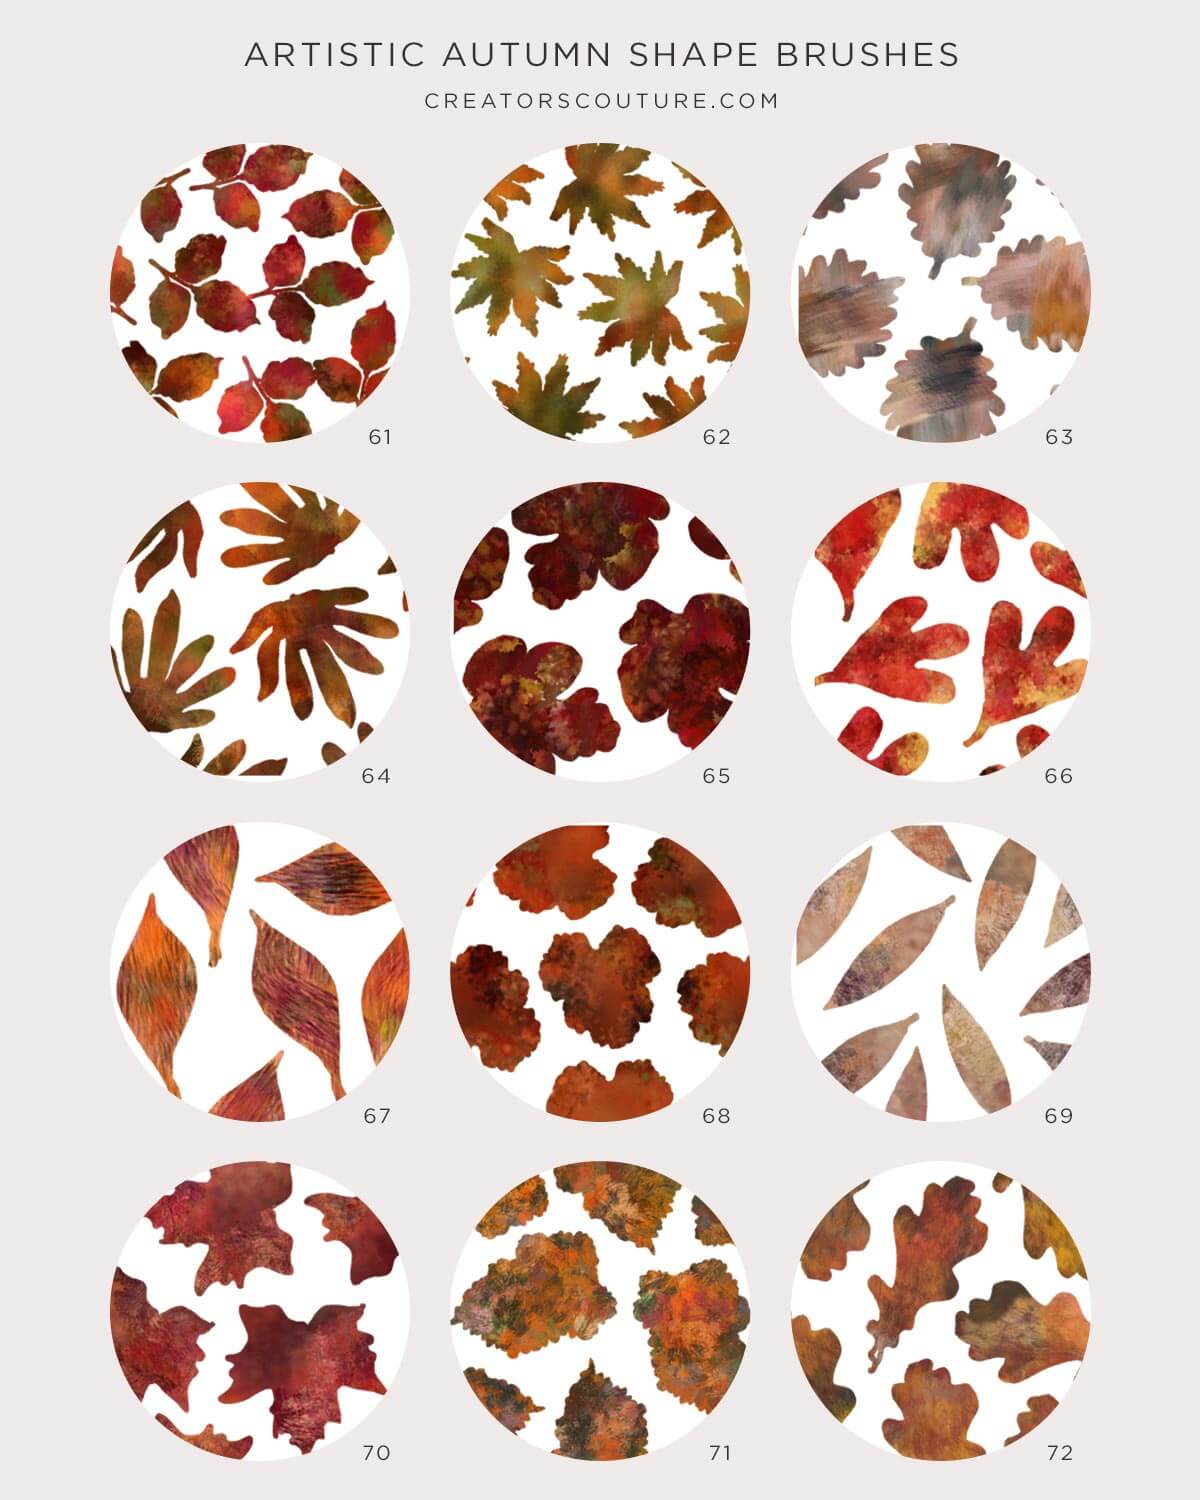 Photoshop stamp brushes in leaf shapes, brush chart of brushes, number 51 through 72 